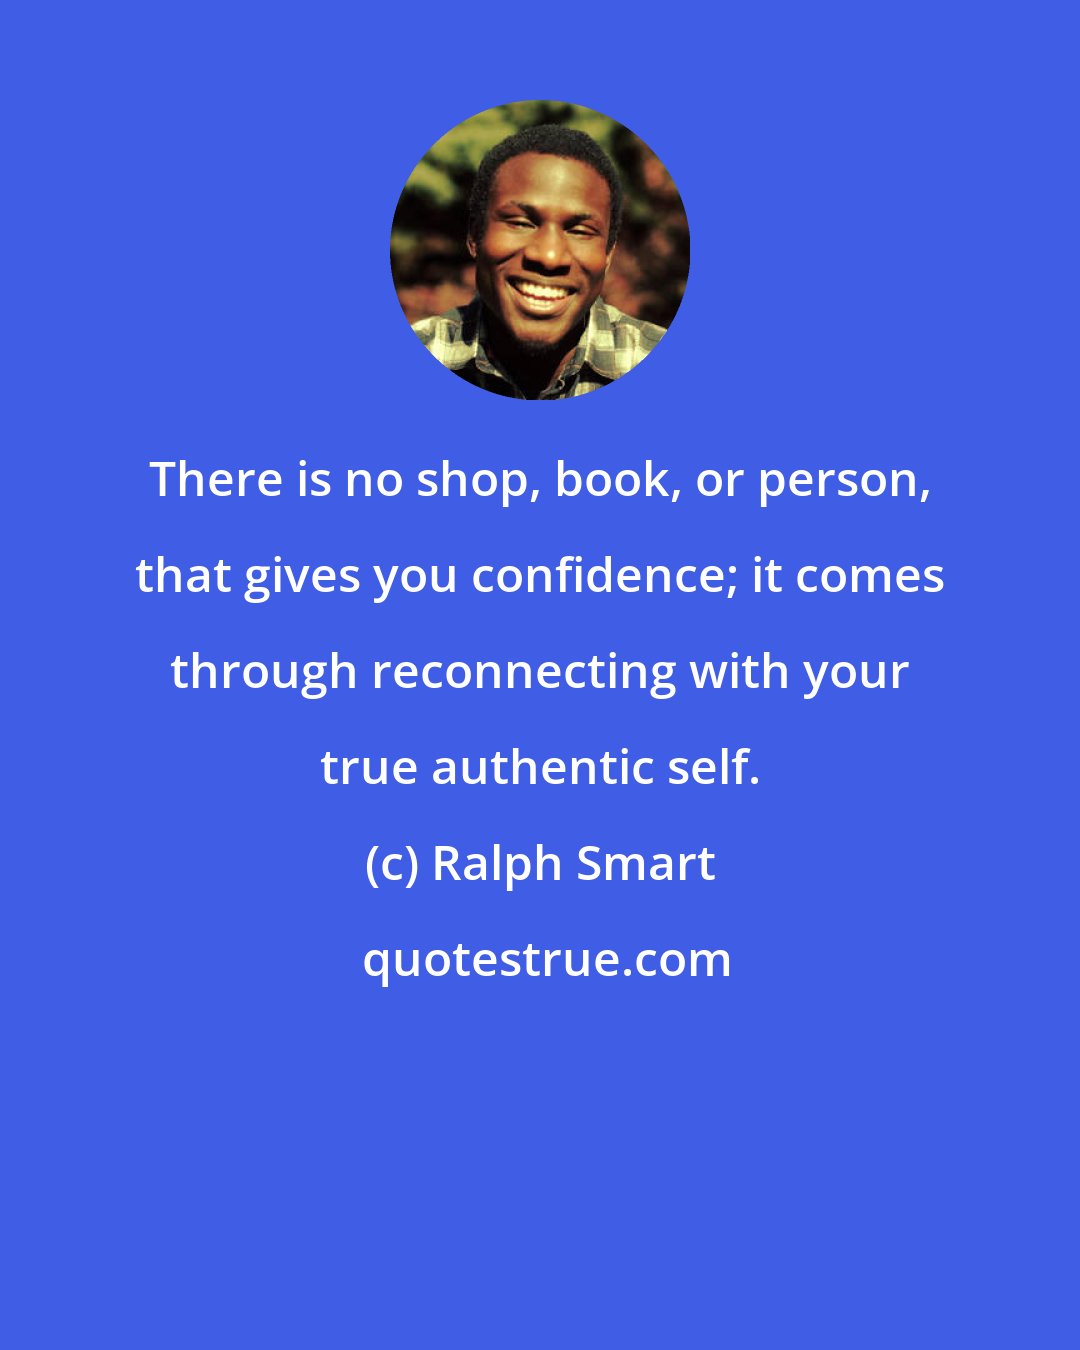 Ralph Smart: There is no shop, book, or person, that gives you confidence; it comes through reconnecting with your true authentic self.